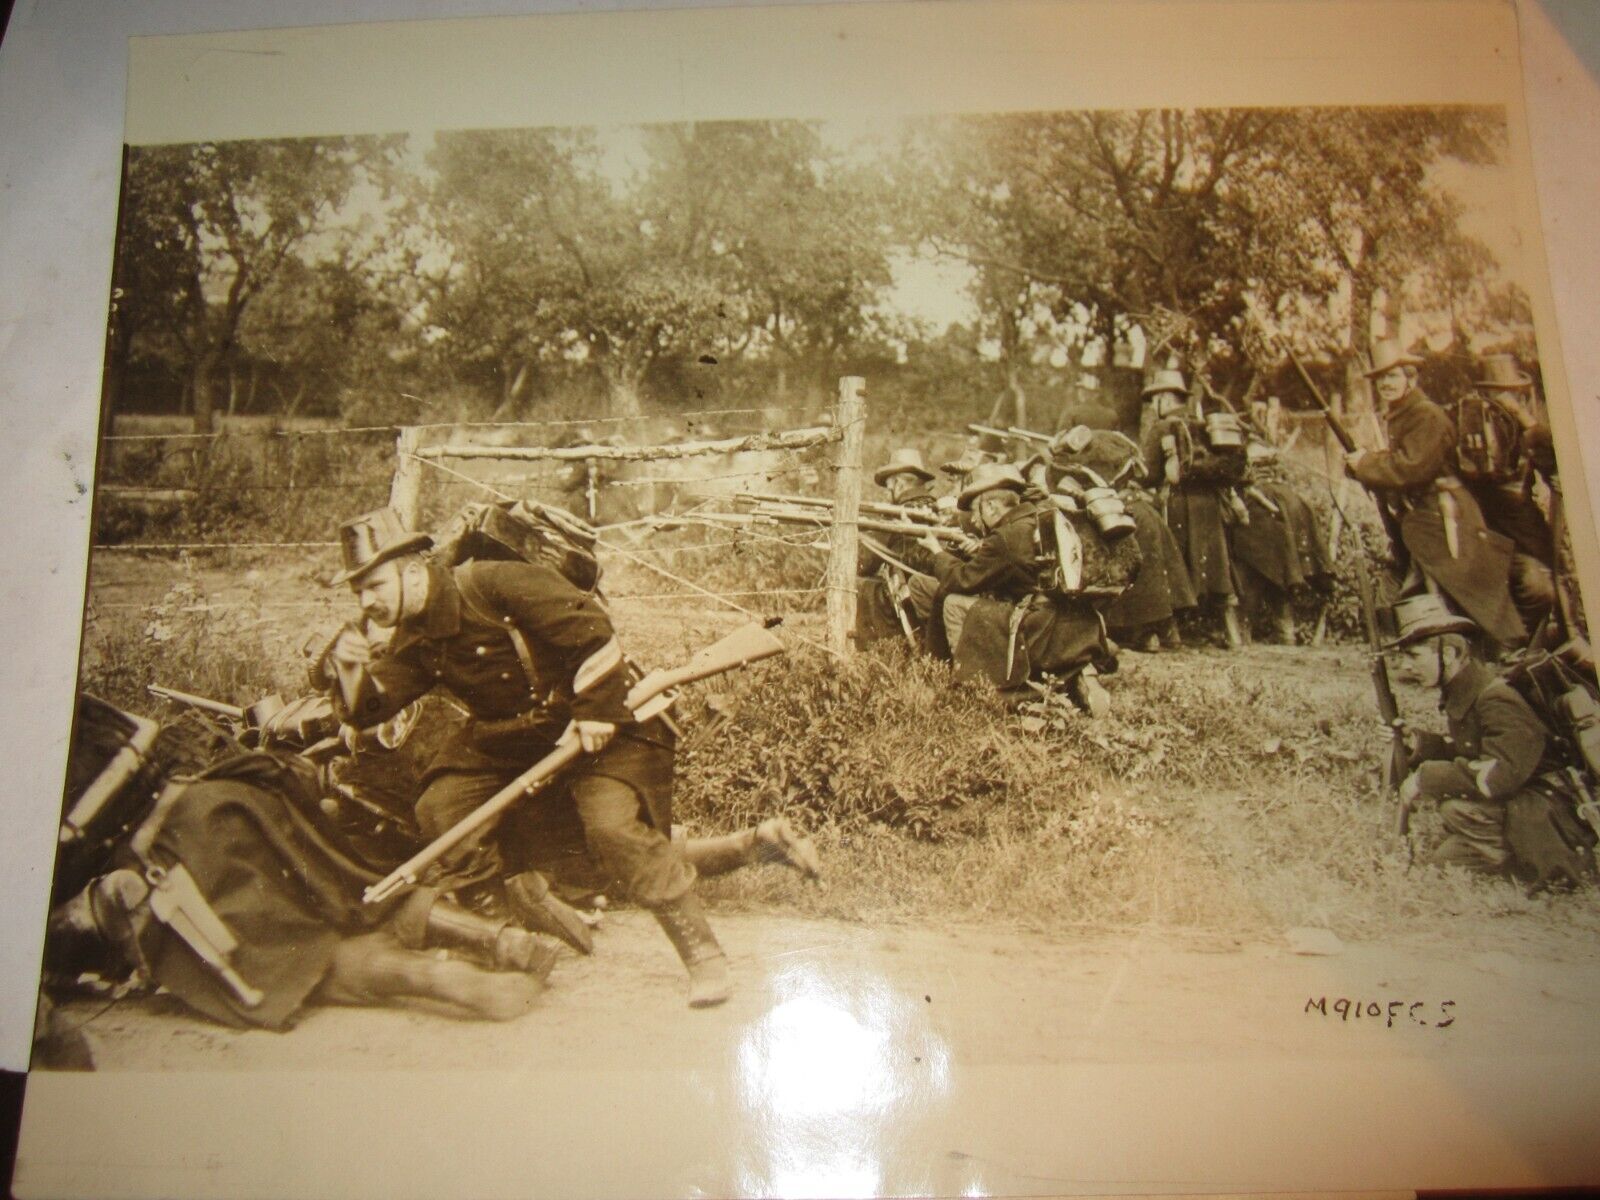 WW1 Vintage World War 1 OFFICIAL WAR PHOTO CAPTIONS ON THE REVERSE 11/1917